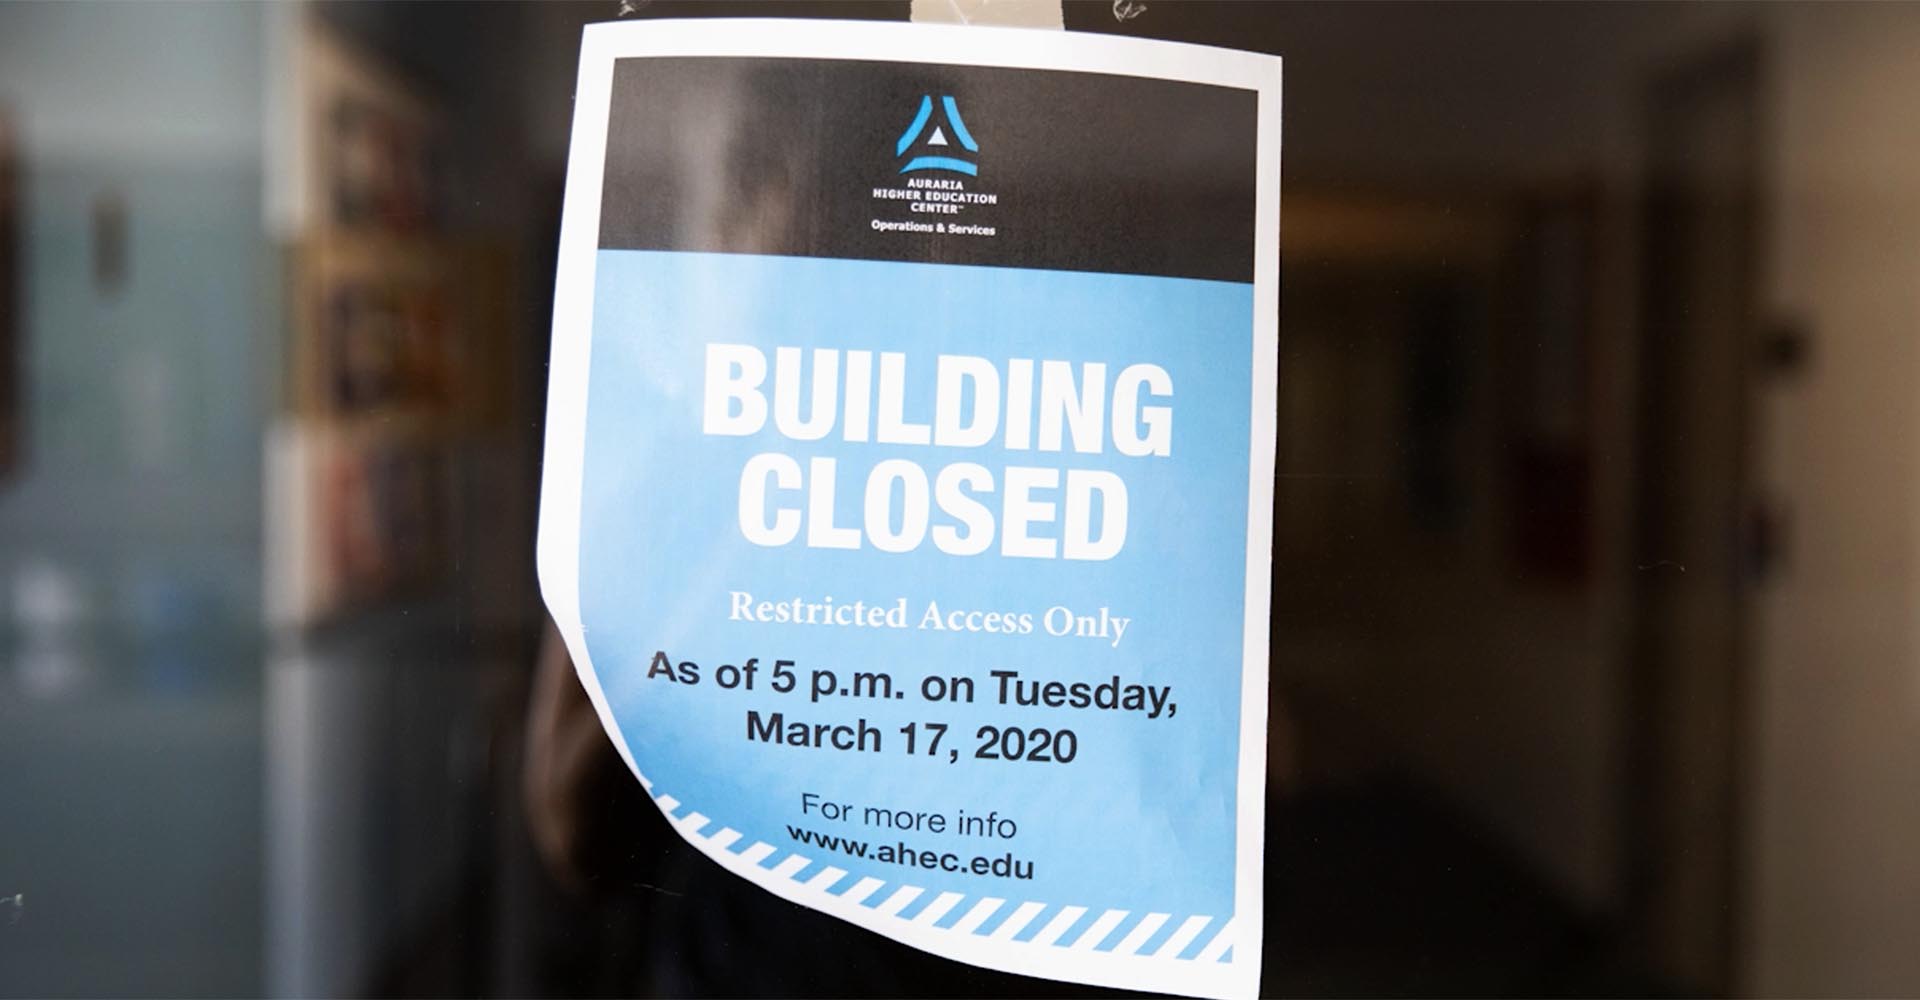 Photo of sign with the text "Building Closed / Restricted Access Only / As of 5 pm on Tuesday, March 17, 2020 / For more info www.ahec.edu"